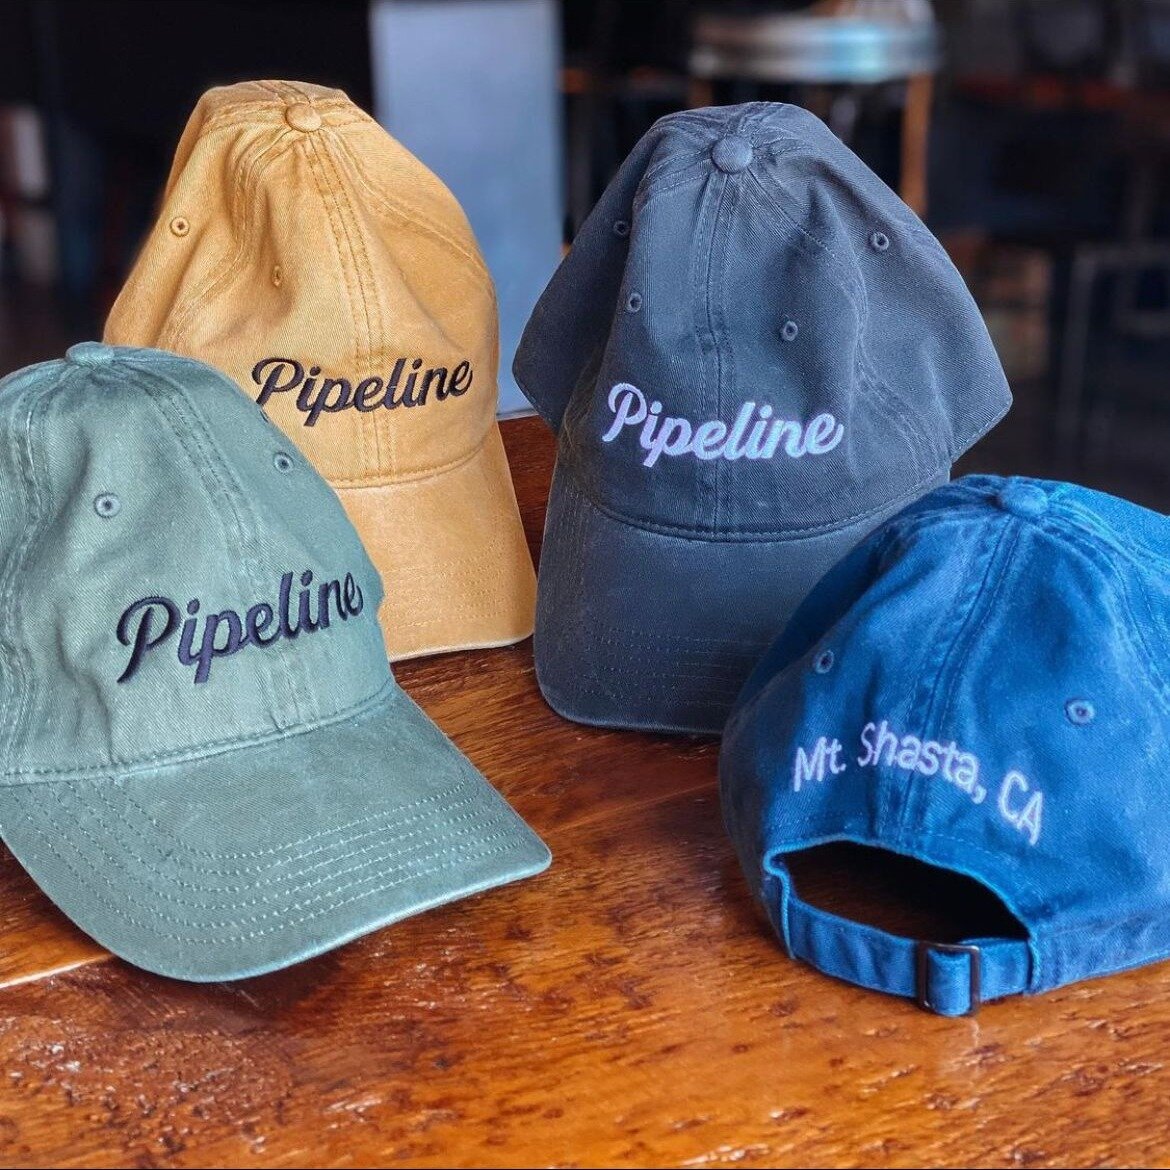 Keep the sun out of your eyes with one of our ball caps! 
#pipelinecrafttapsandkitchen #pipelinecrafttaps #pipelinemtshasta #mtshastaeats #visitmtshasta #seesiskiyou  #craftbeer